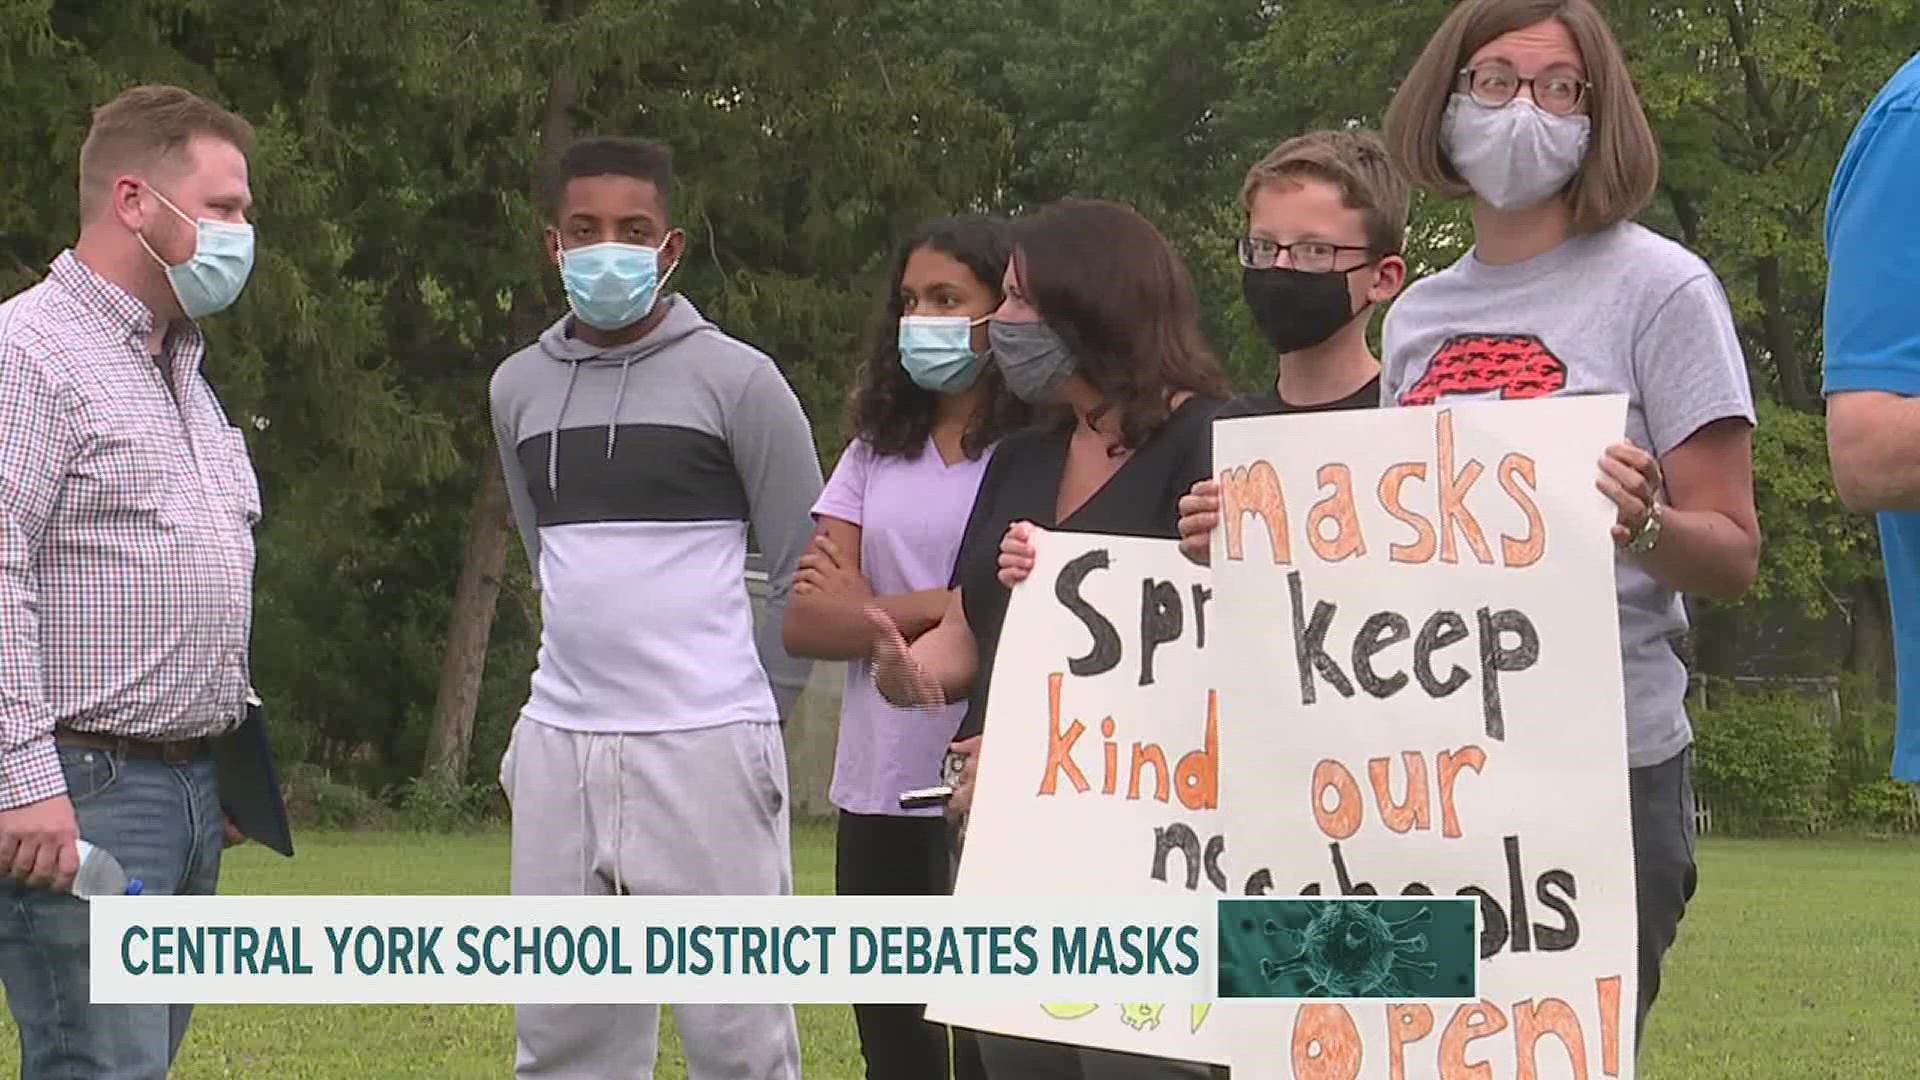 The school district's current guidance reads that face covering as "optional" but that the district will "supportive of individuals who choose to wear masks."